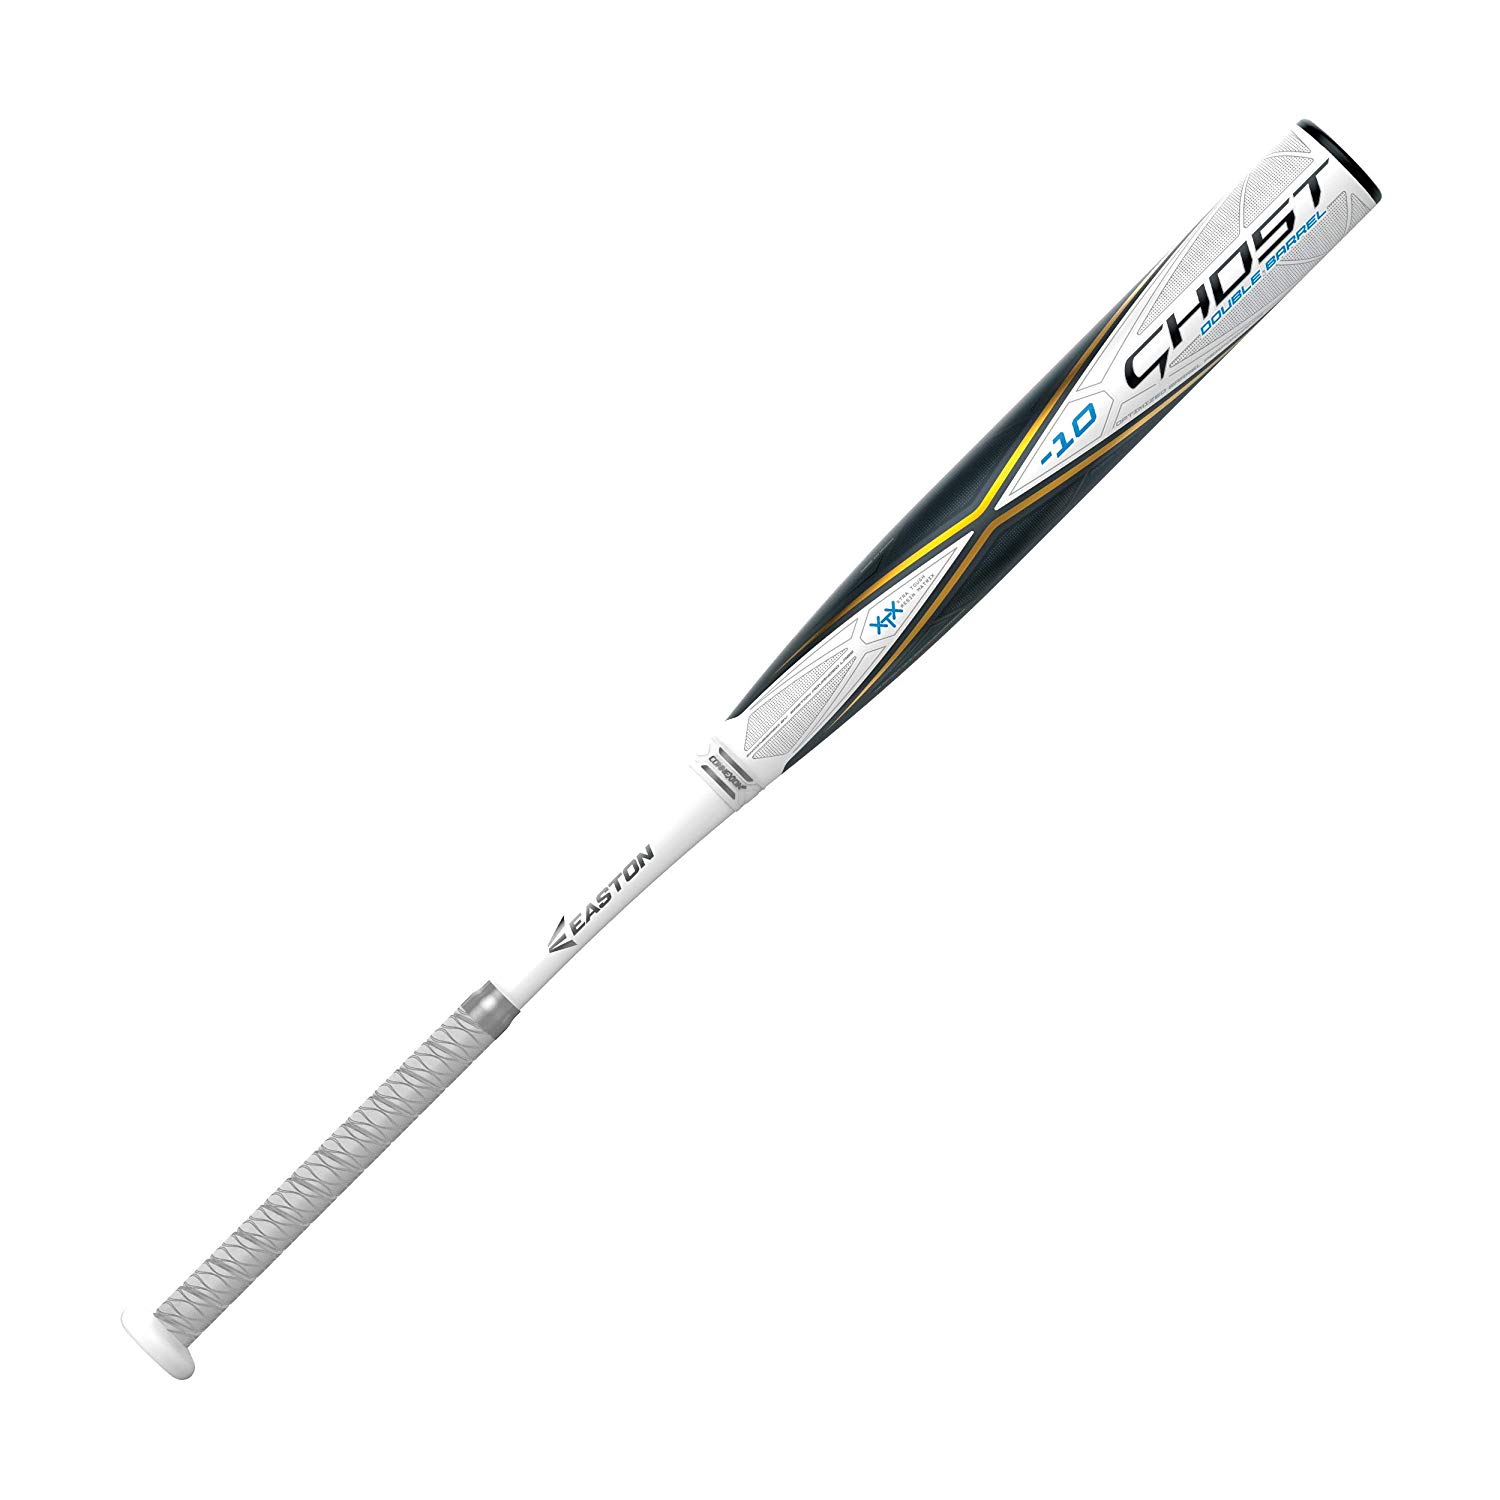 easton-ghost-10-fastpitch-softball-bat-2020-dual-stamp-32-inch-22-oz FP20GH102020-3222 Easton 628412264119 Patent-pending Double Barrel construction is the ultimate combination of feel pop